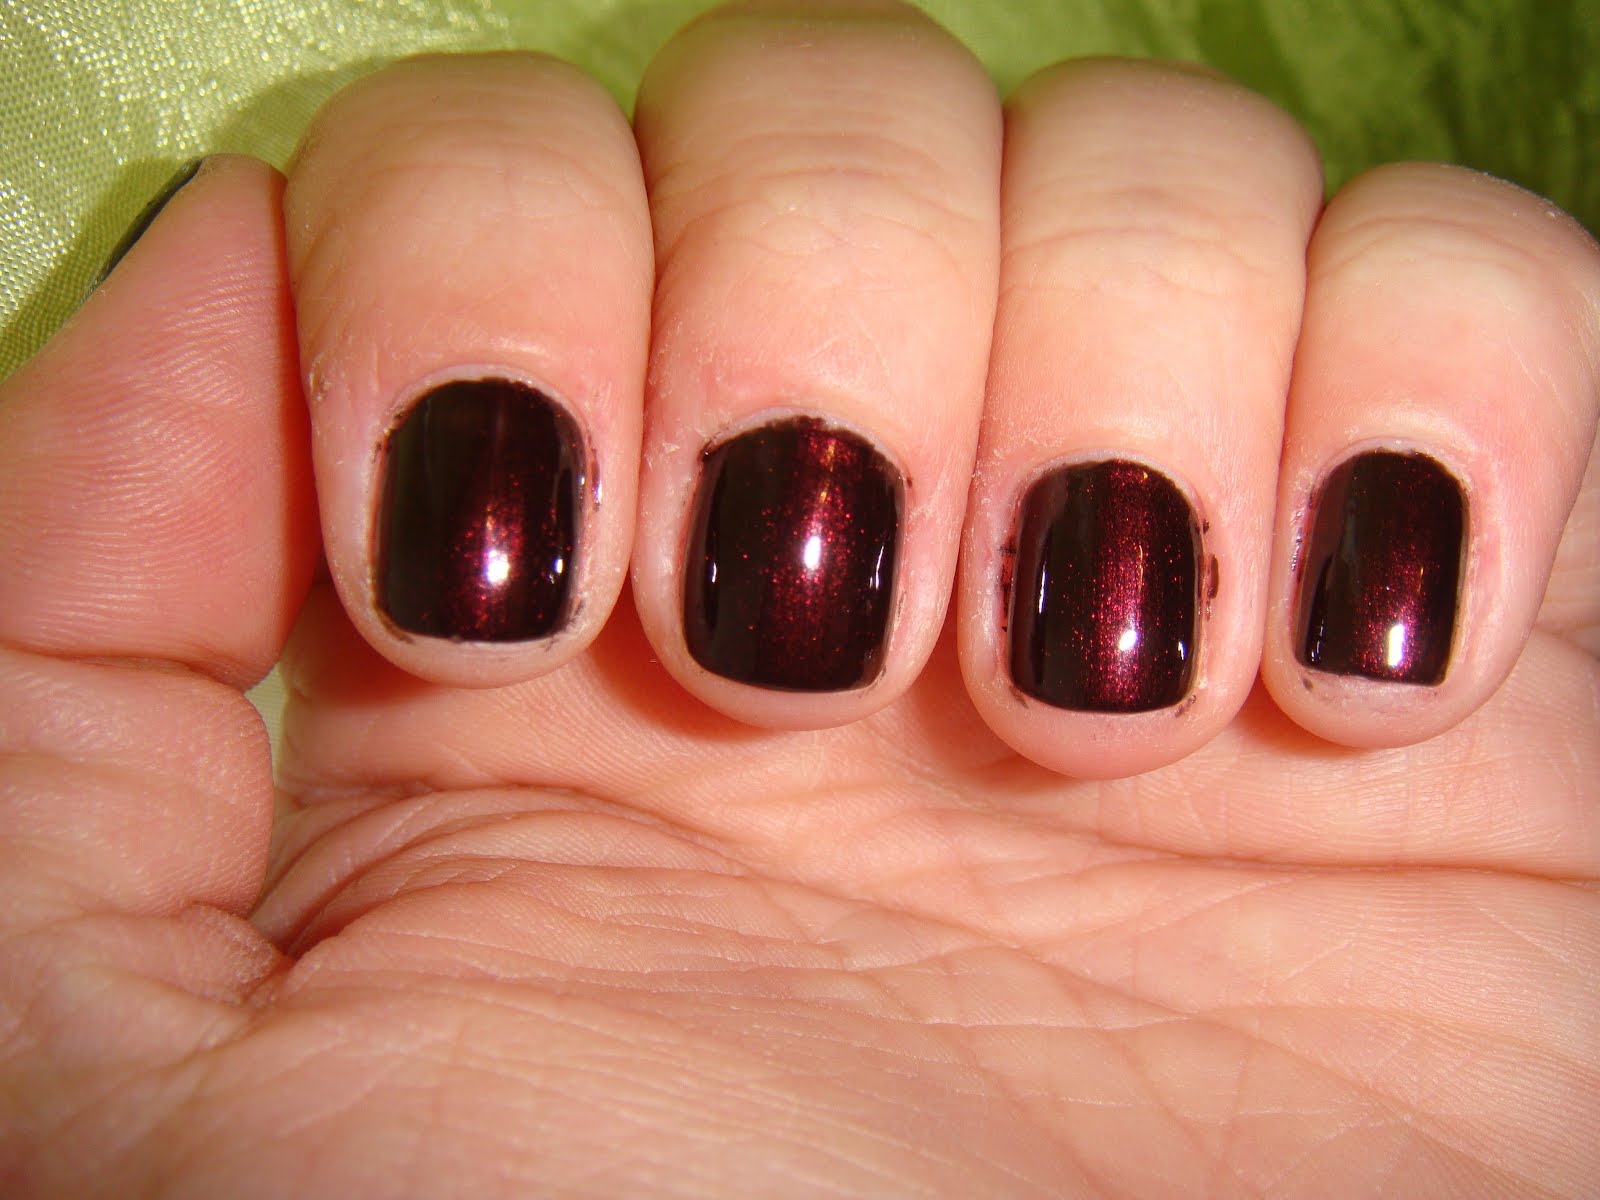 5. OPI Midnight in Moscow - wide 4